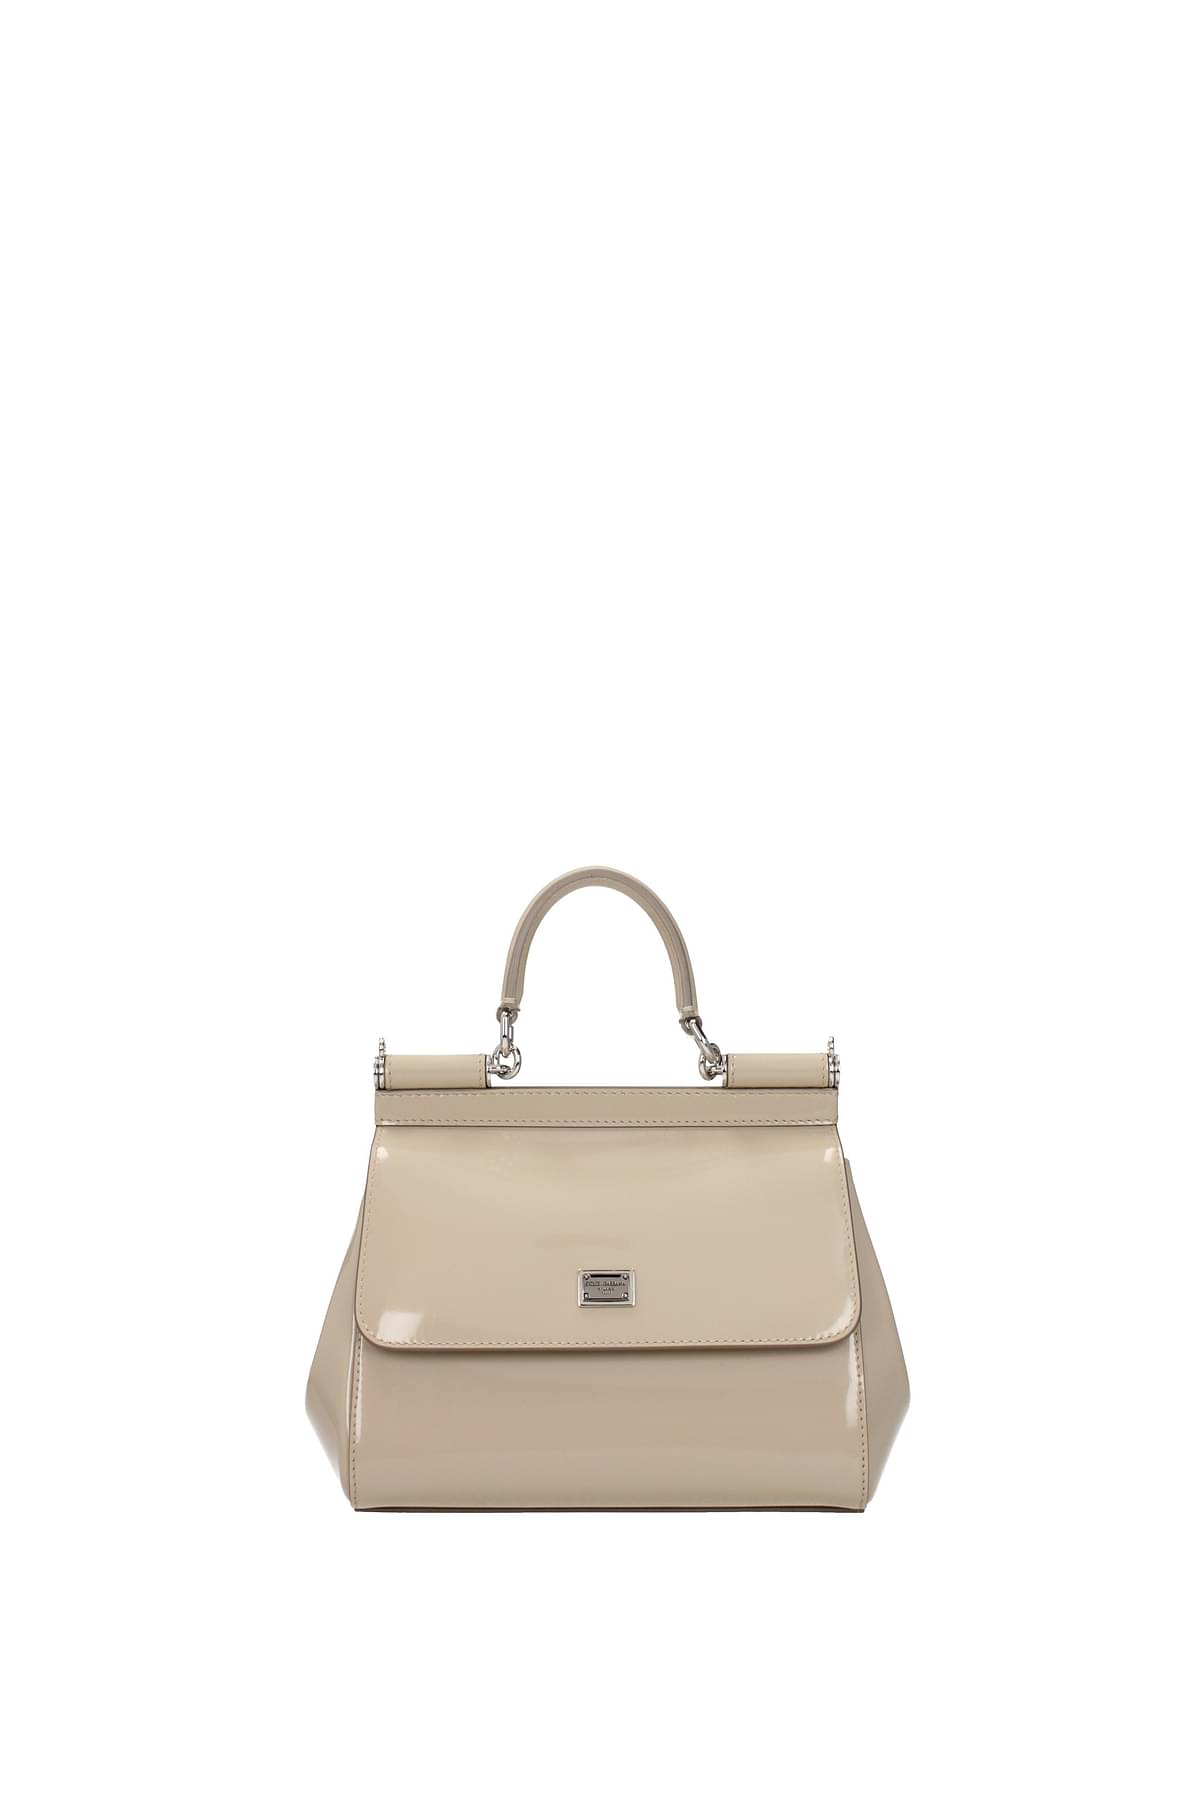 X Kim Sicily Small Patent Leather Shoulder Bag in Beige - Dolce Gabbana